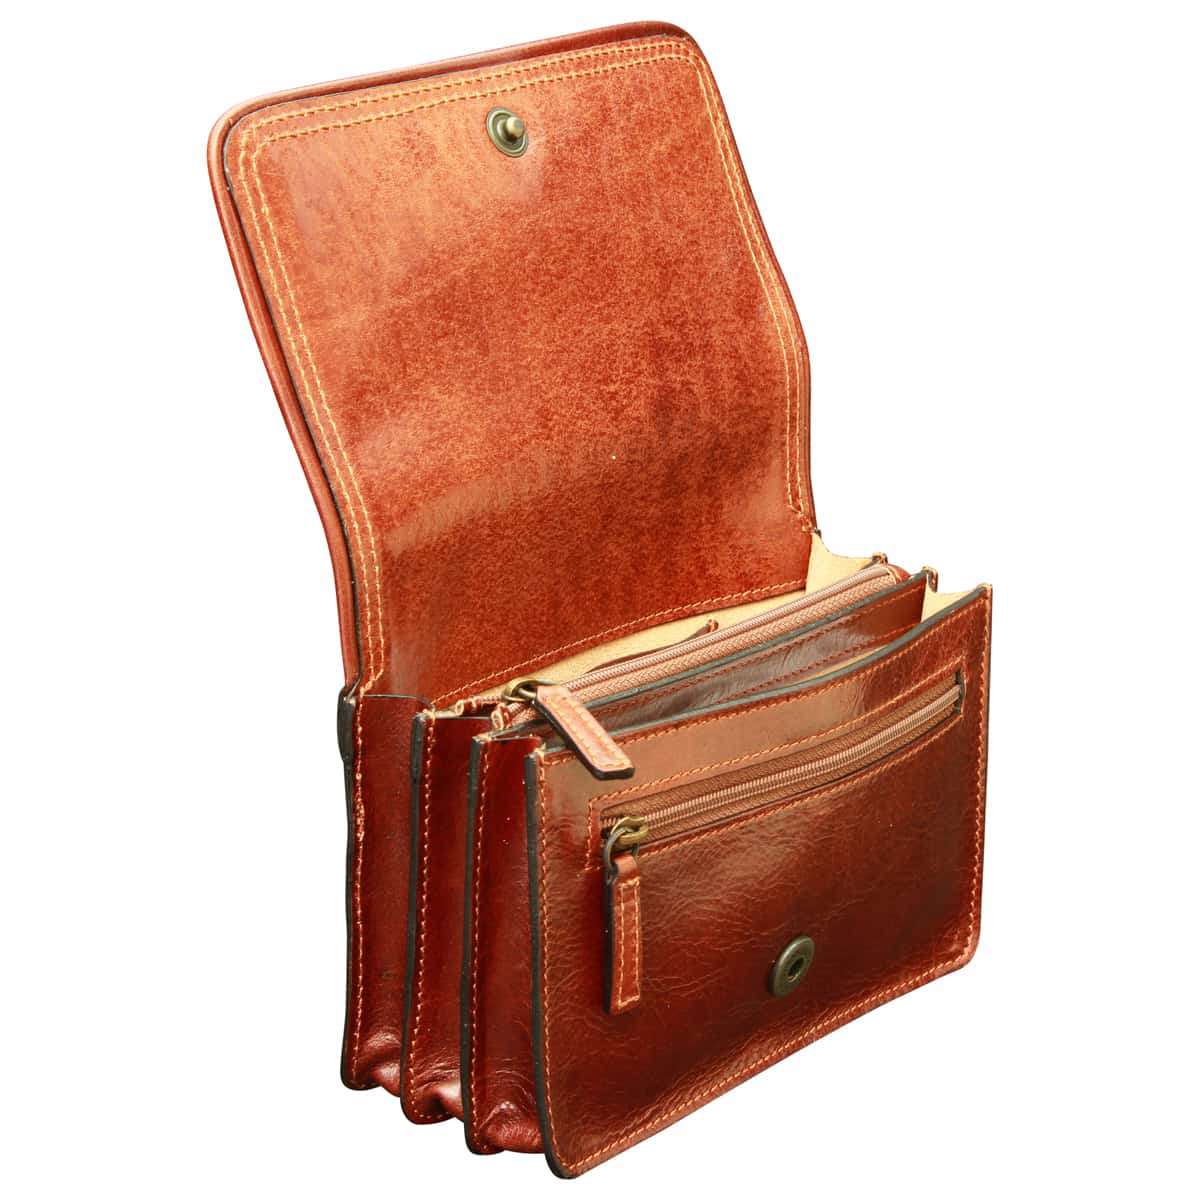 Leather pochette - Brown | 407905MA US | Old Angler Firenze